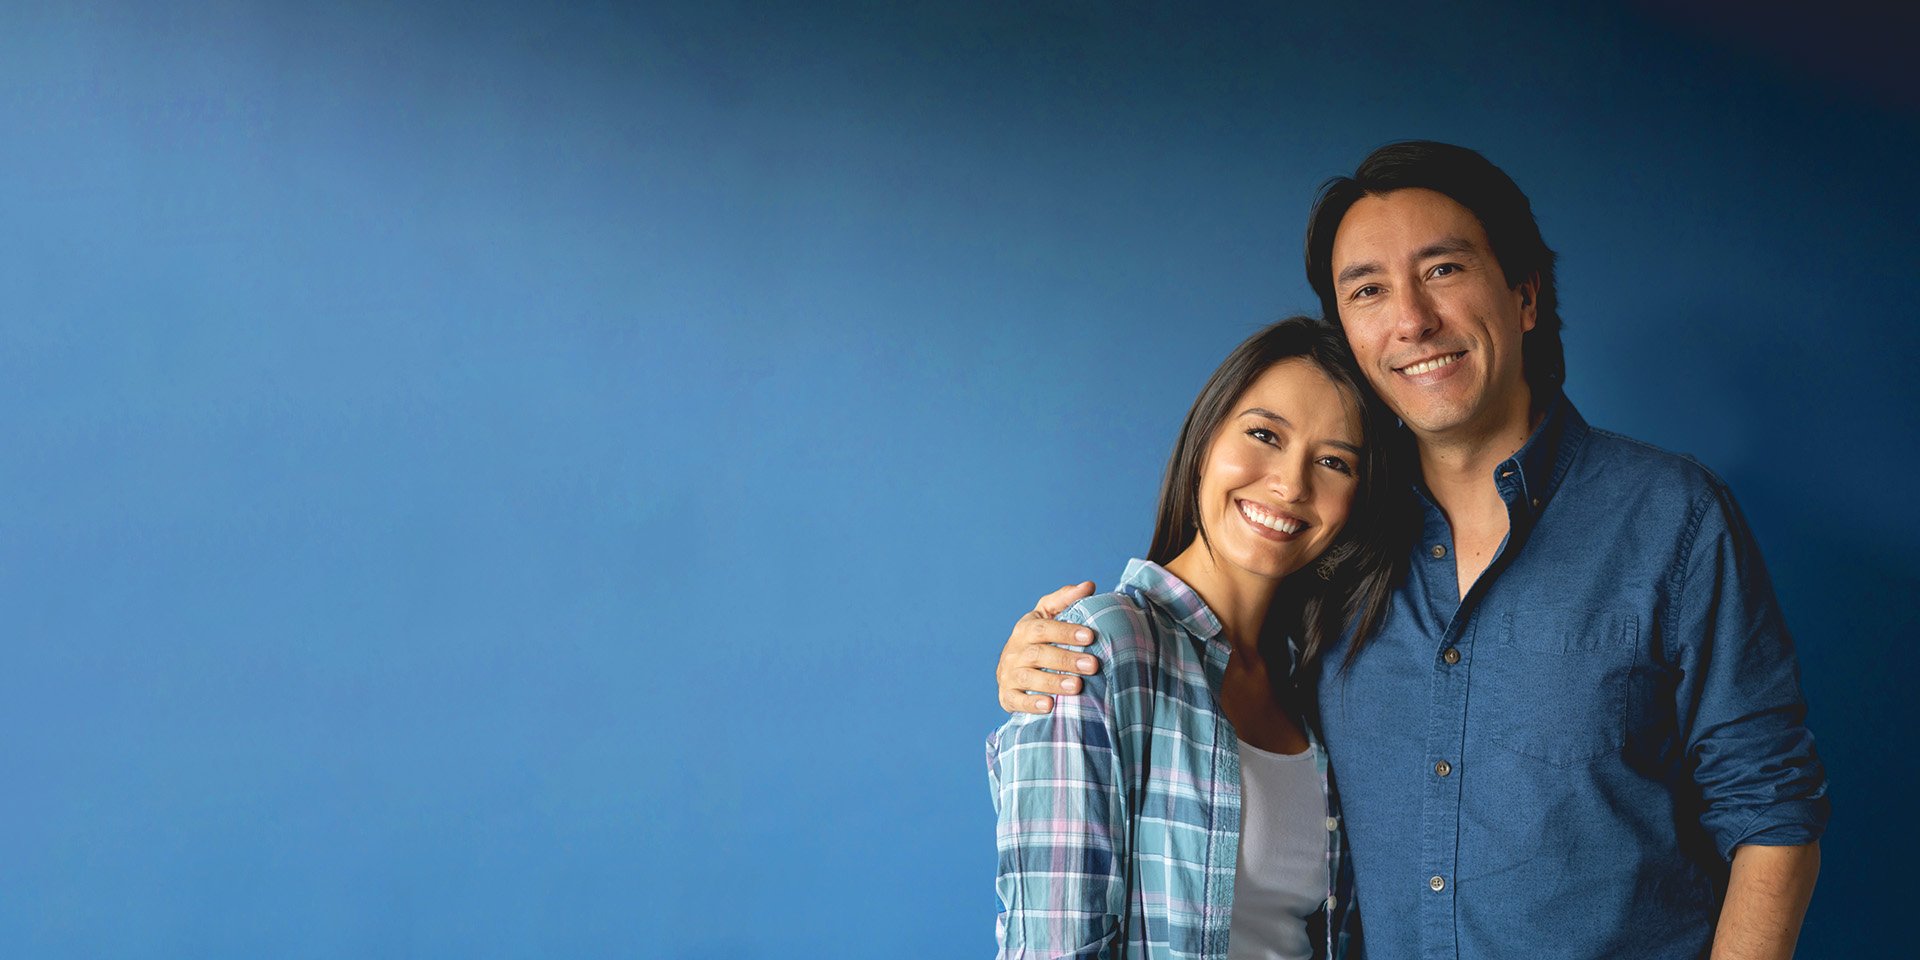 A happy couple hugging each other and smiling for the camera in front of a dark blue background.